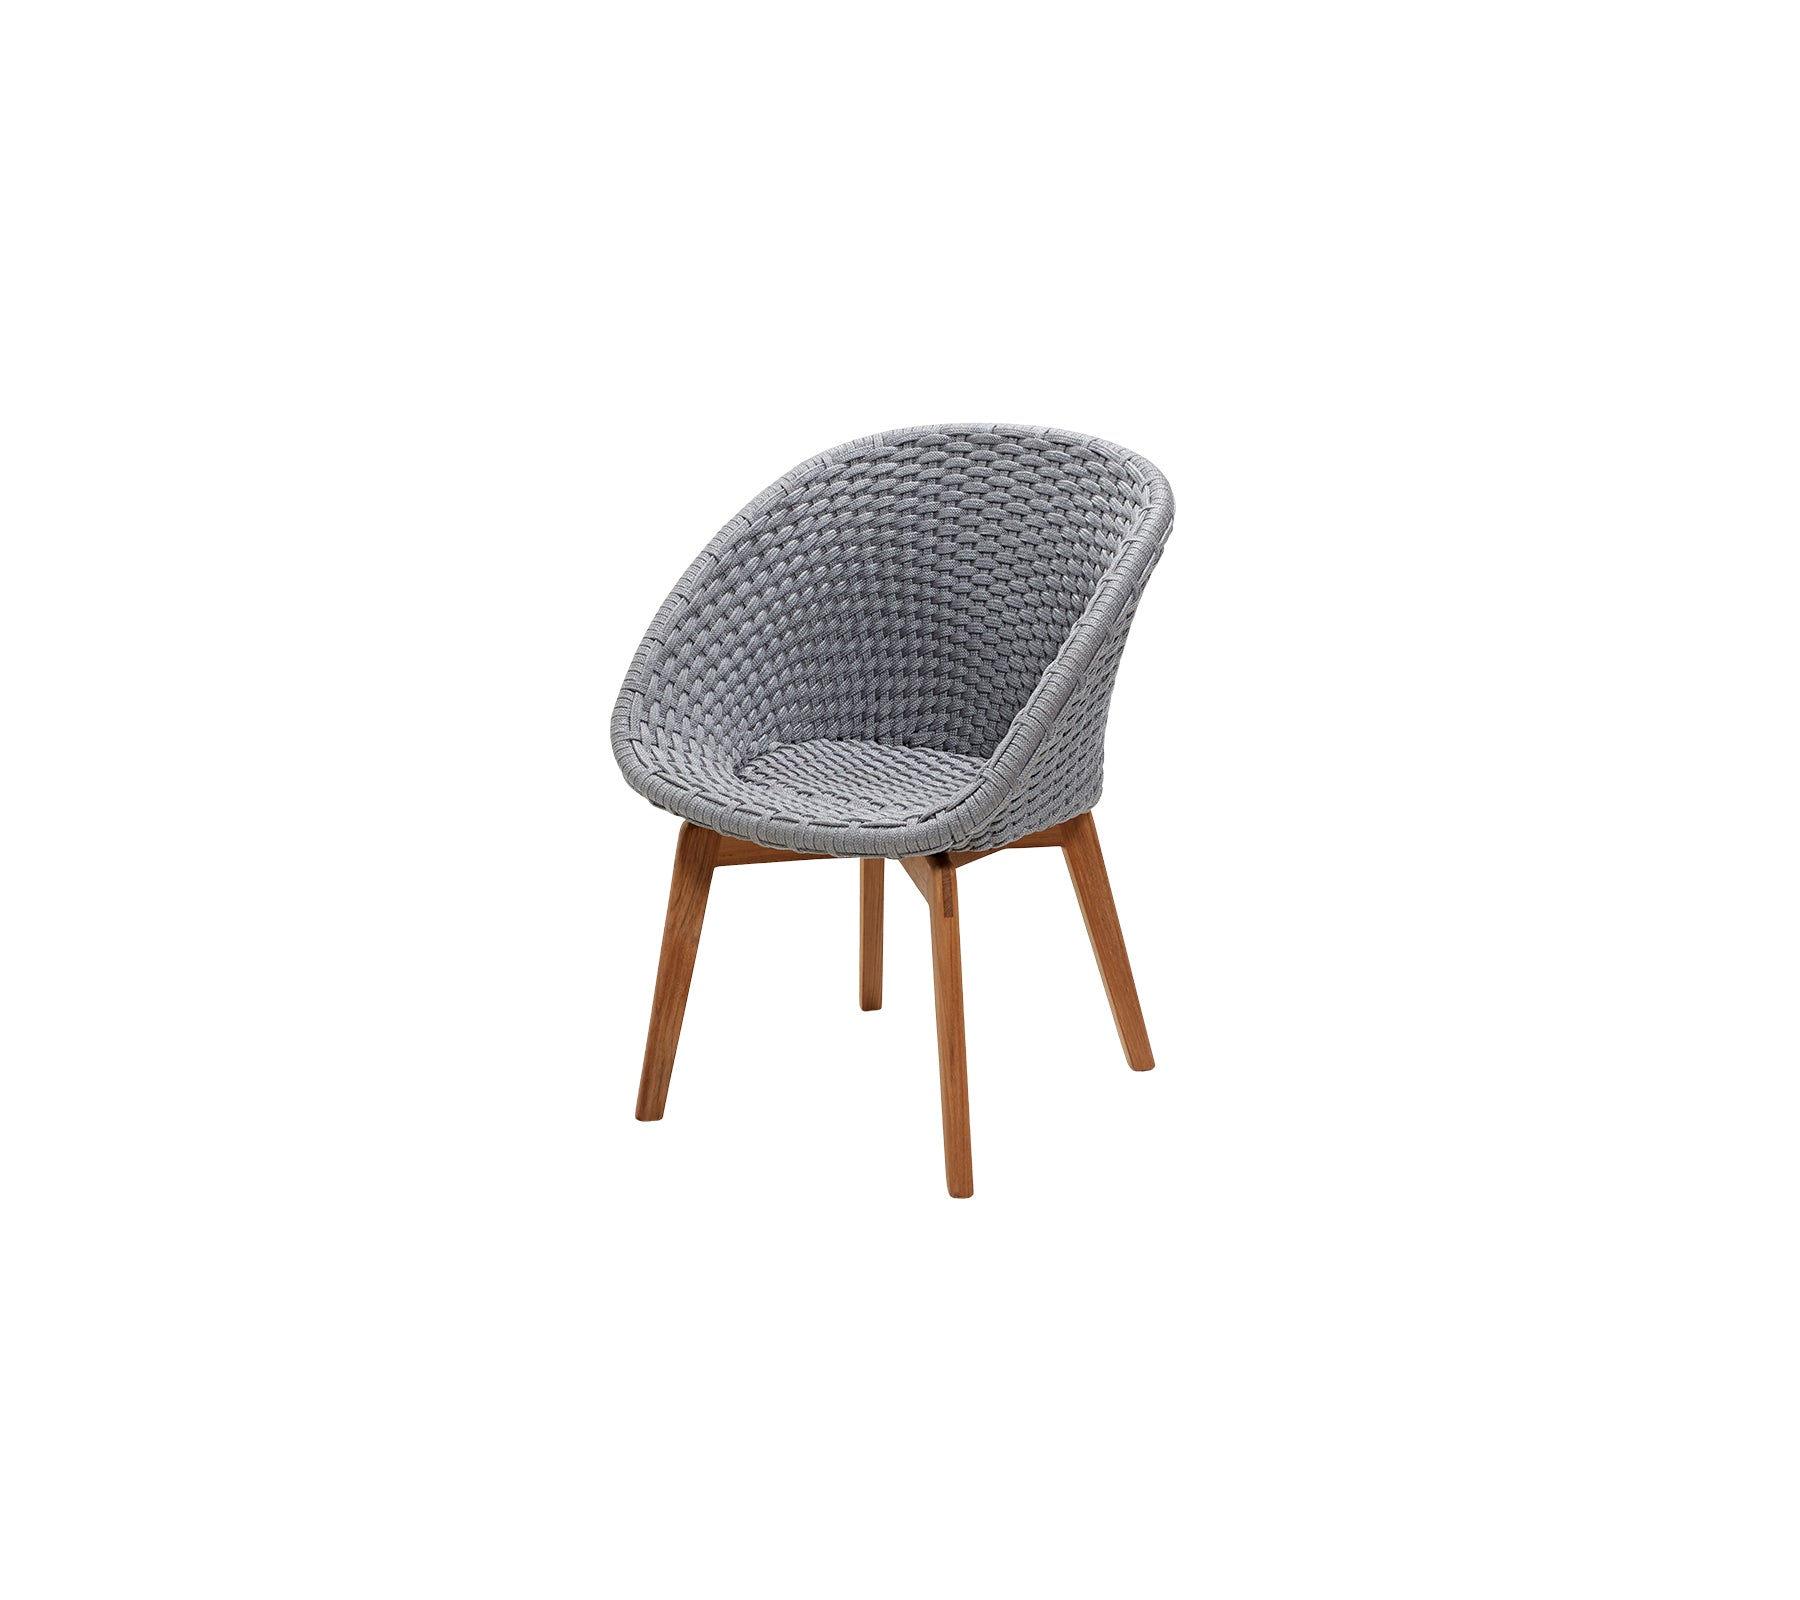 Cane-line Peacock Chair 5454ROLGT